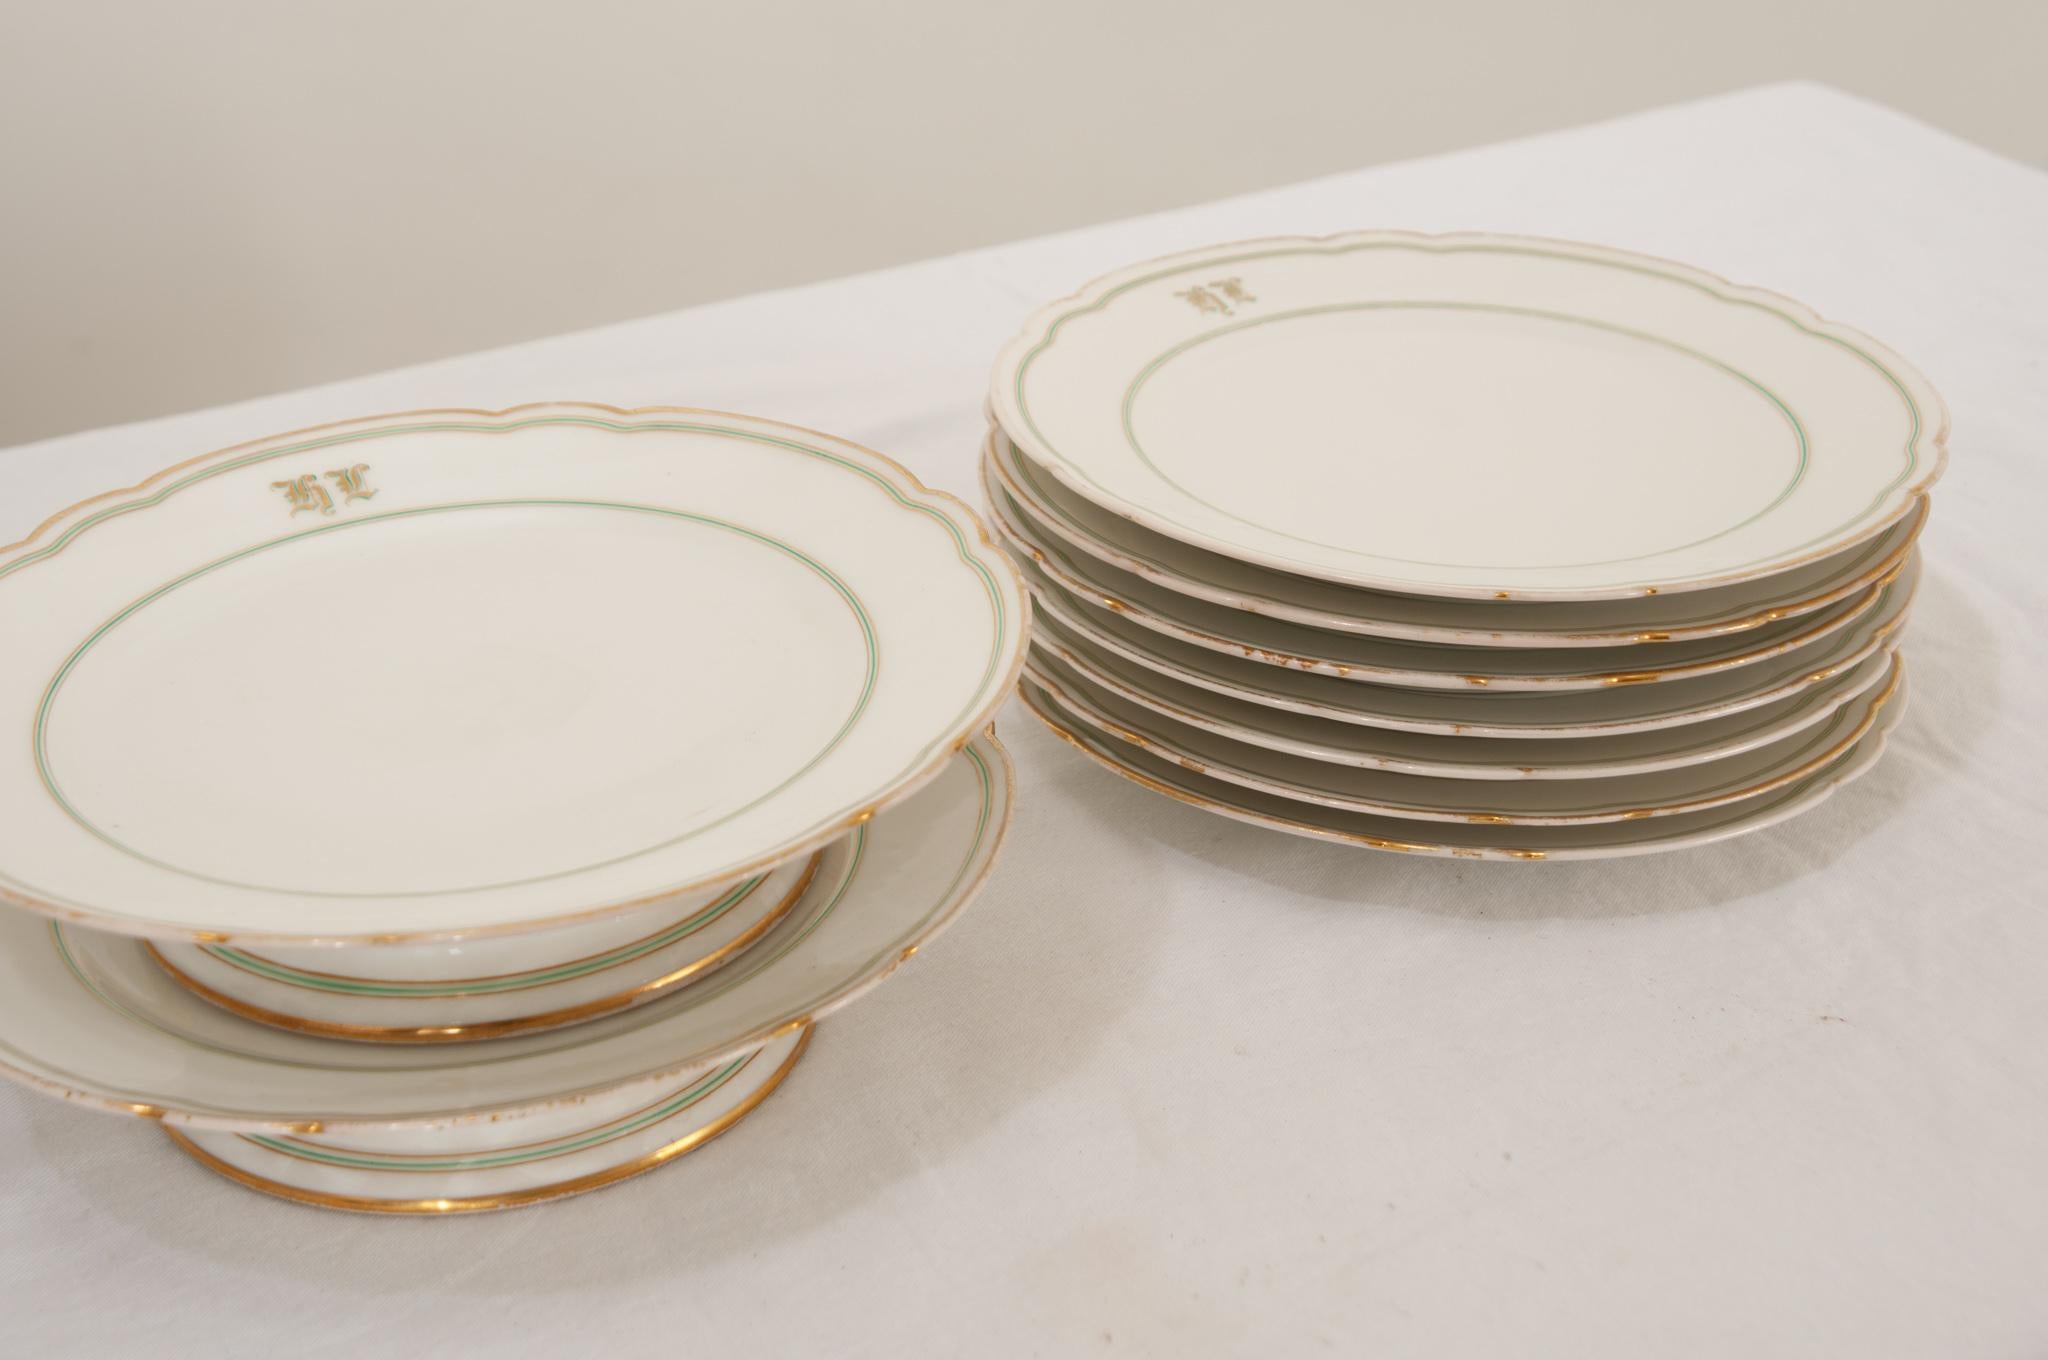 French Old Paris “KL” 16 Piece Service In Good Condition For Sale In Baton Rouge, LA